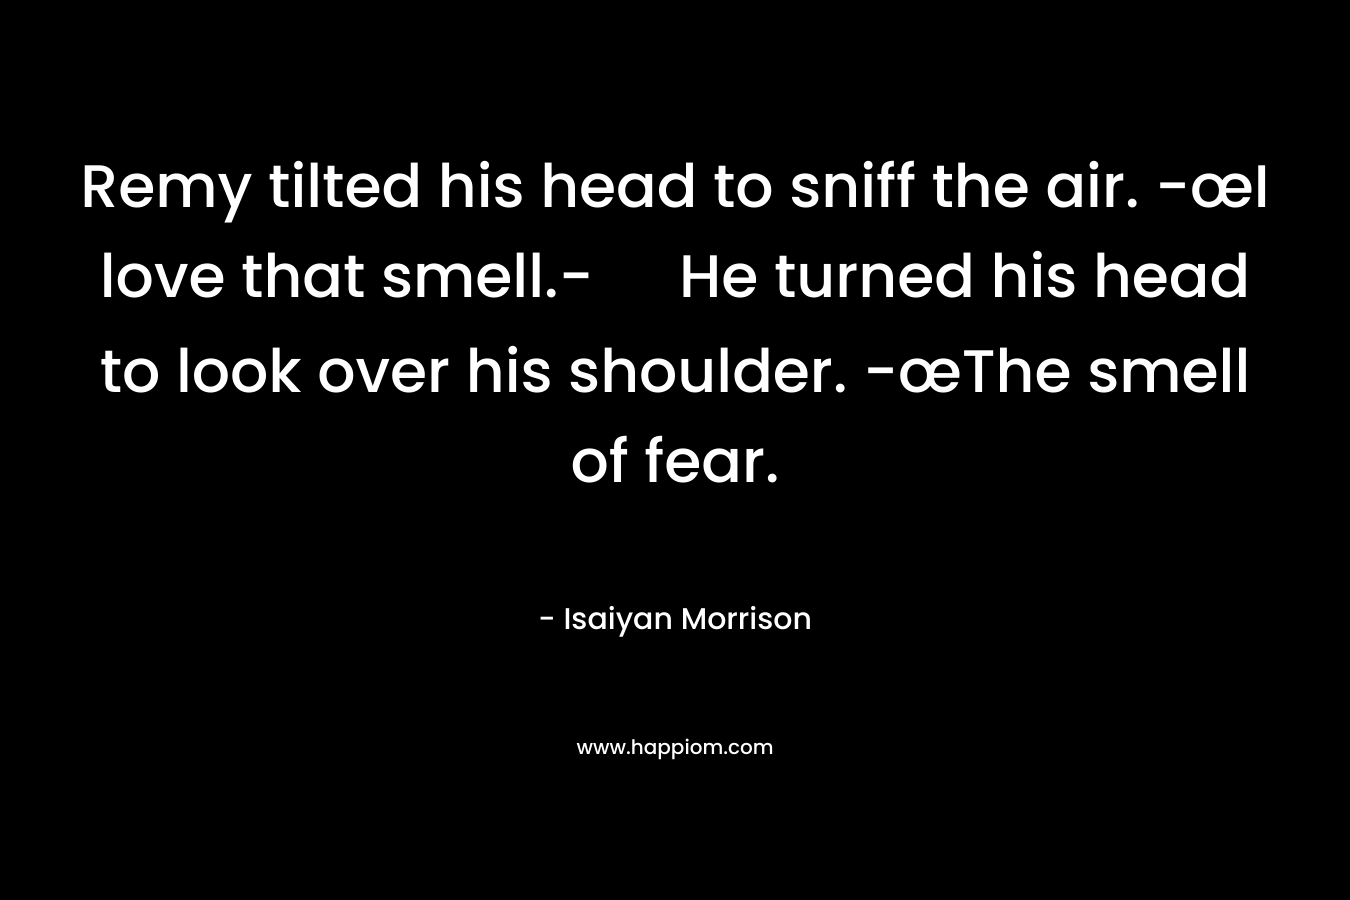 Remy tilted his head to sniff the air. -œI love that smell.- He turned his head to look over his shoulder. -œThe smell of fear. – Isaiyan Morrison